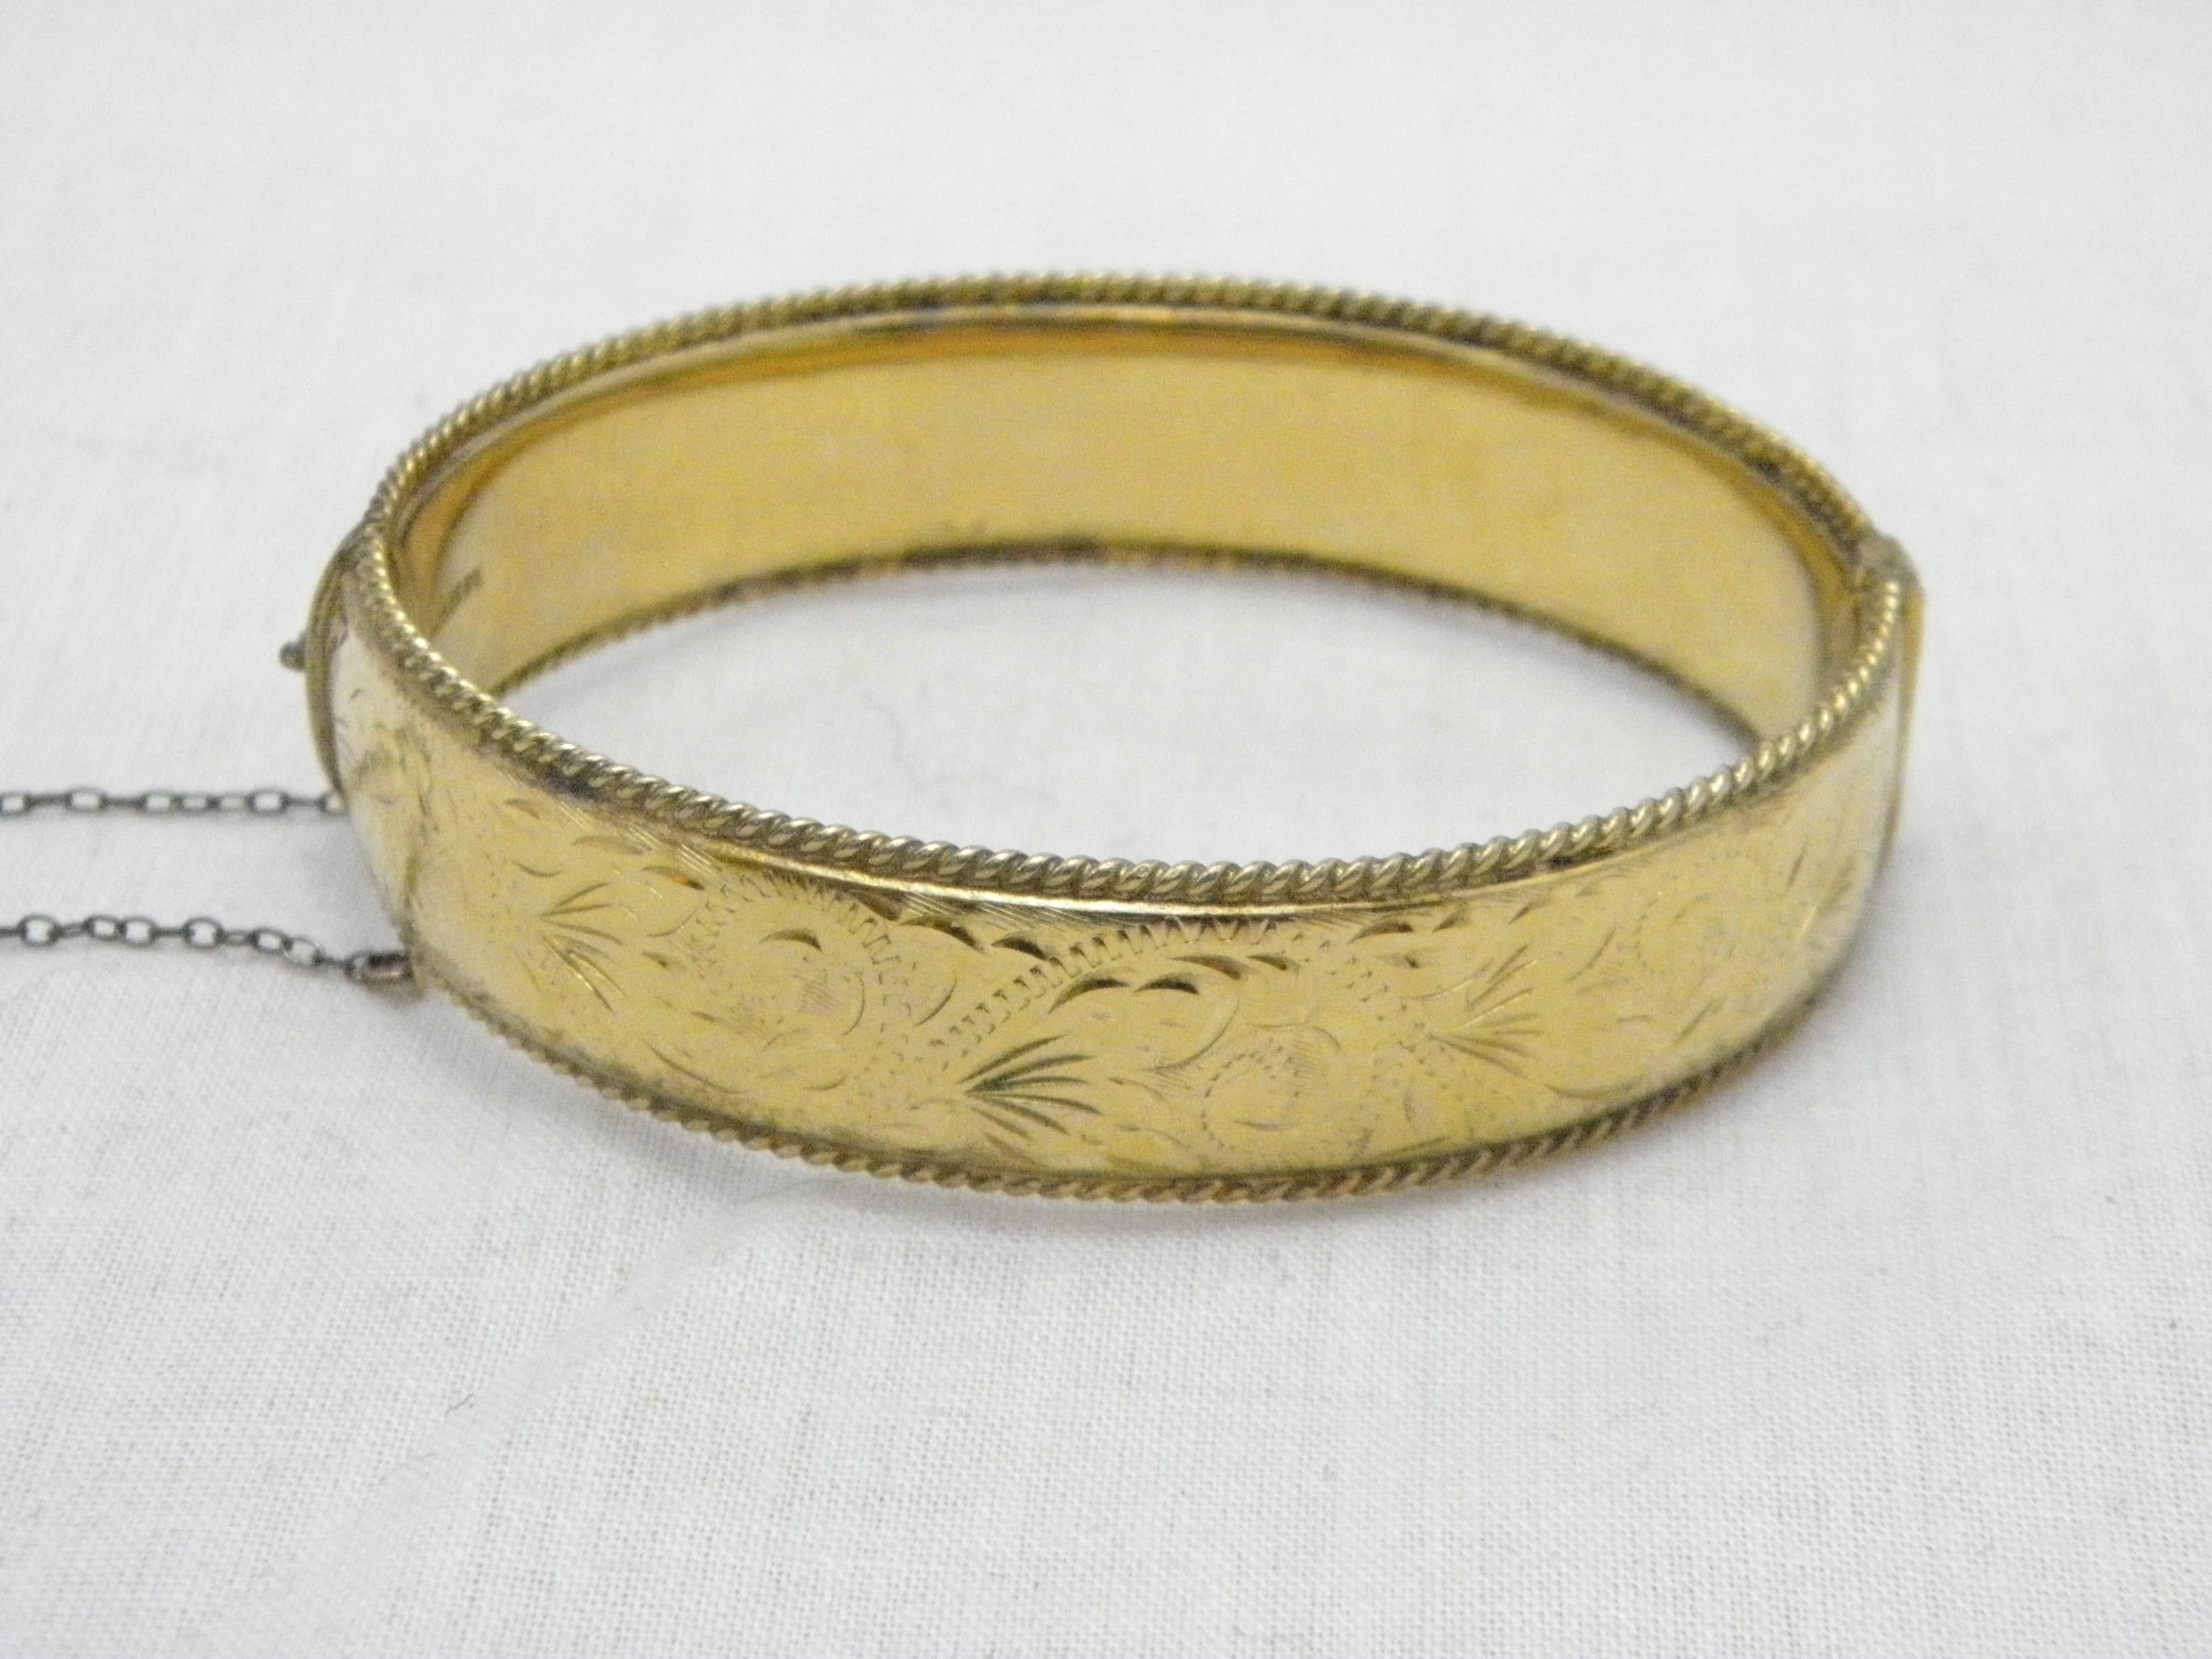 If you have landed on this page then you have an eye for beauty.

On offer is this gorgeous
9CT GOLD ROLLED FLORAL ENGRAVED HINGED BANGLE BRACELET

DETAILS
Material: Thick 9ct Rolled Gold (see details below)
Style: Hinged Cuff with Hand Engraved